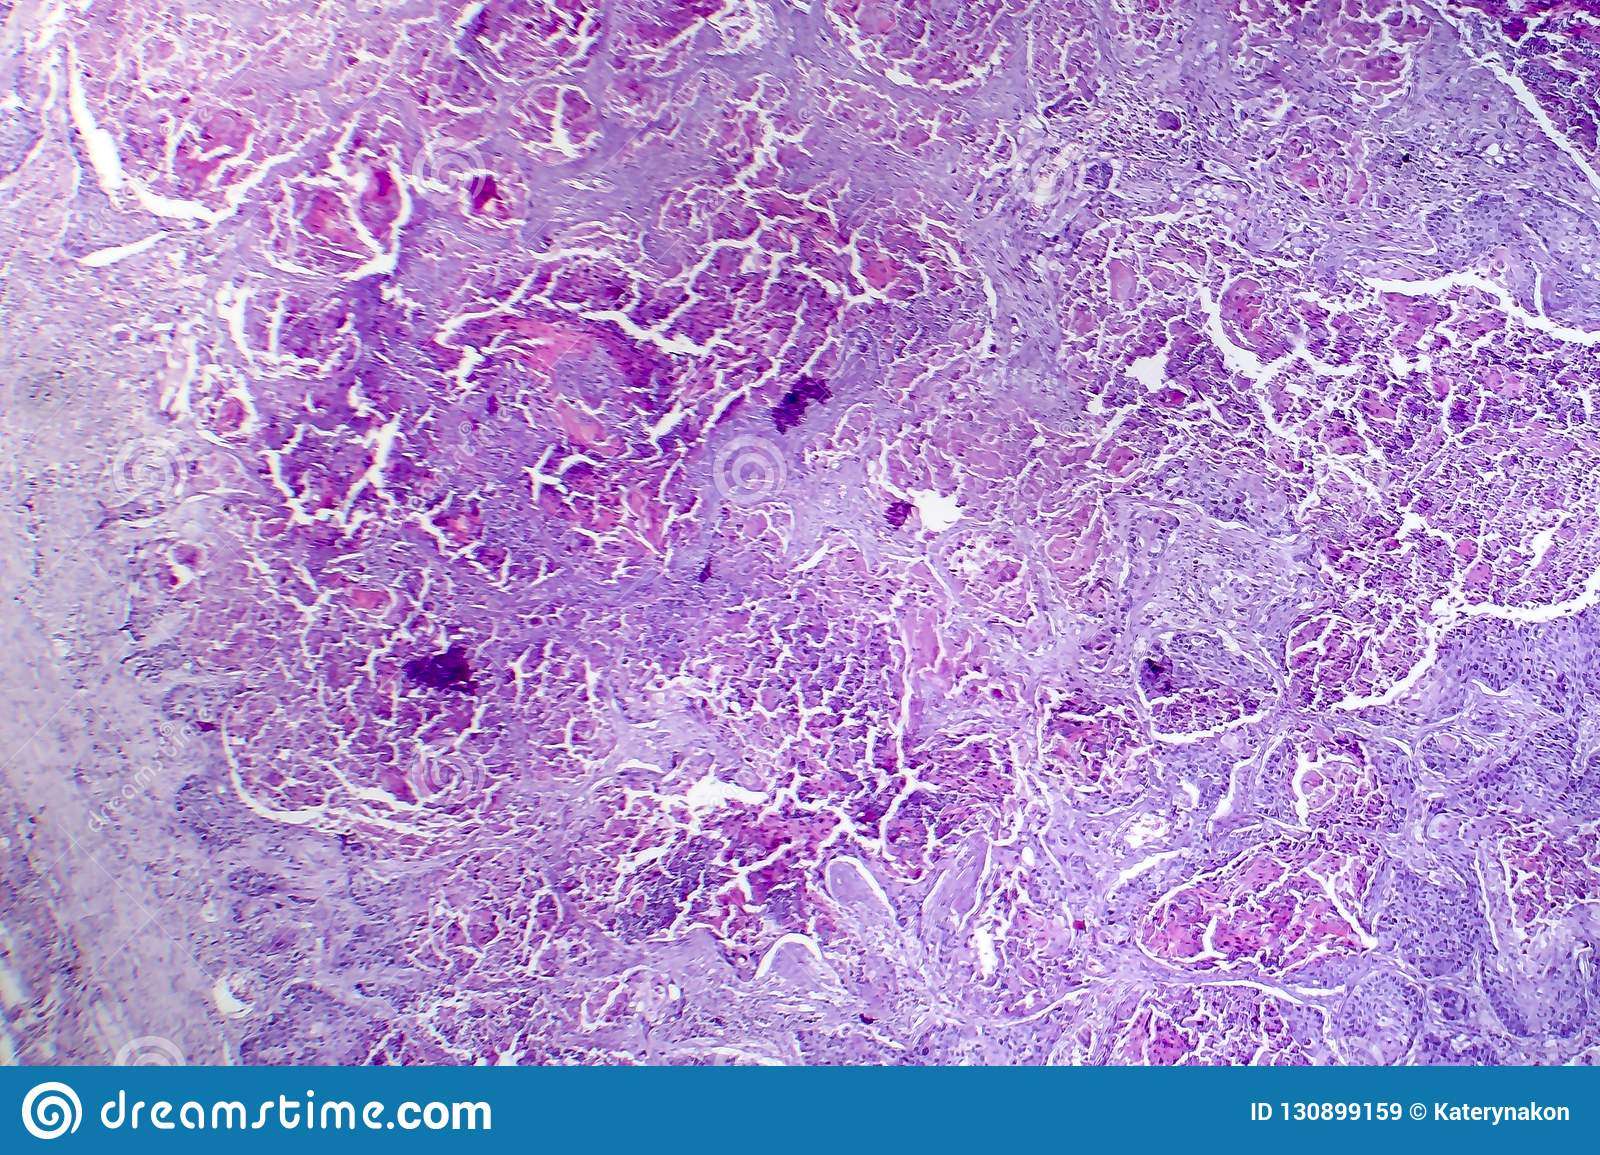 Squamous Cell Carcinoma Of The Lung Stock Image